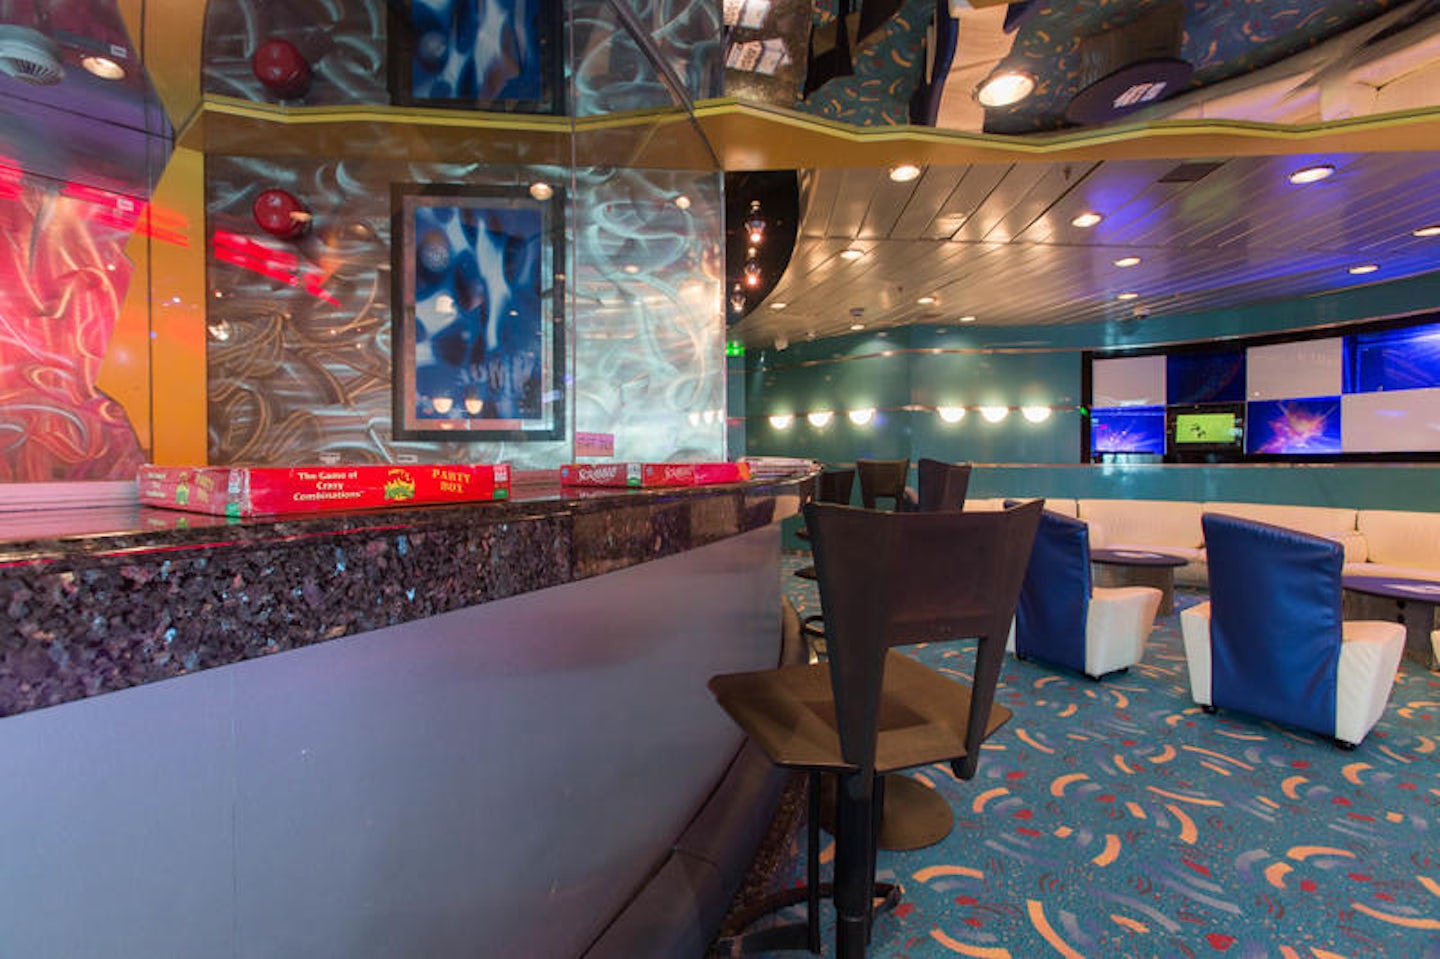 Fuel Teen Center on Enchantment of the Seas